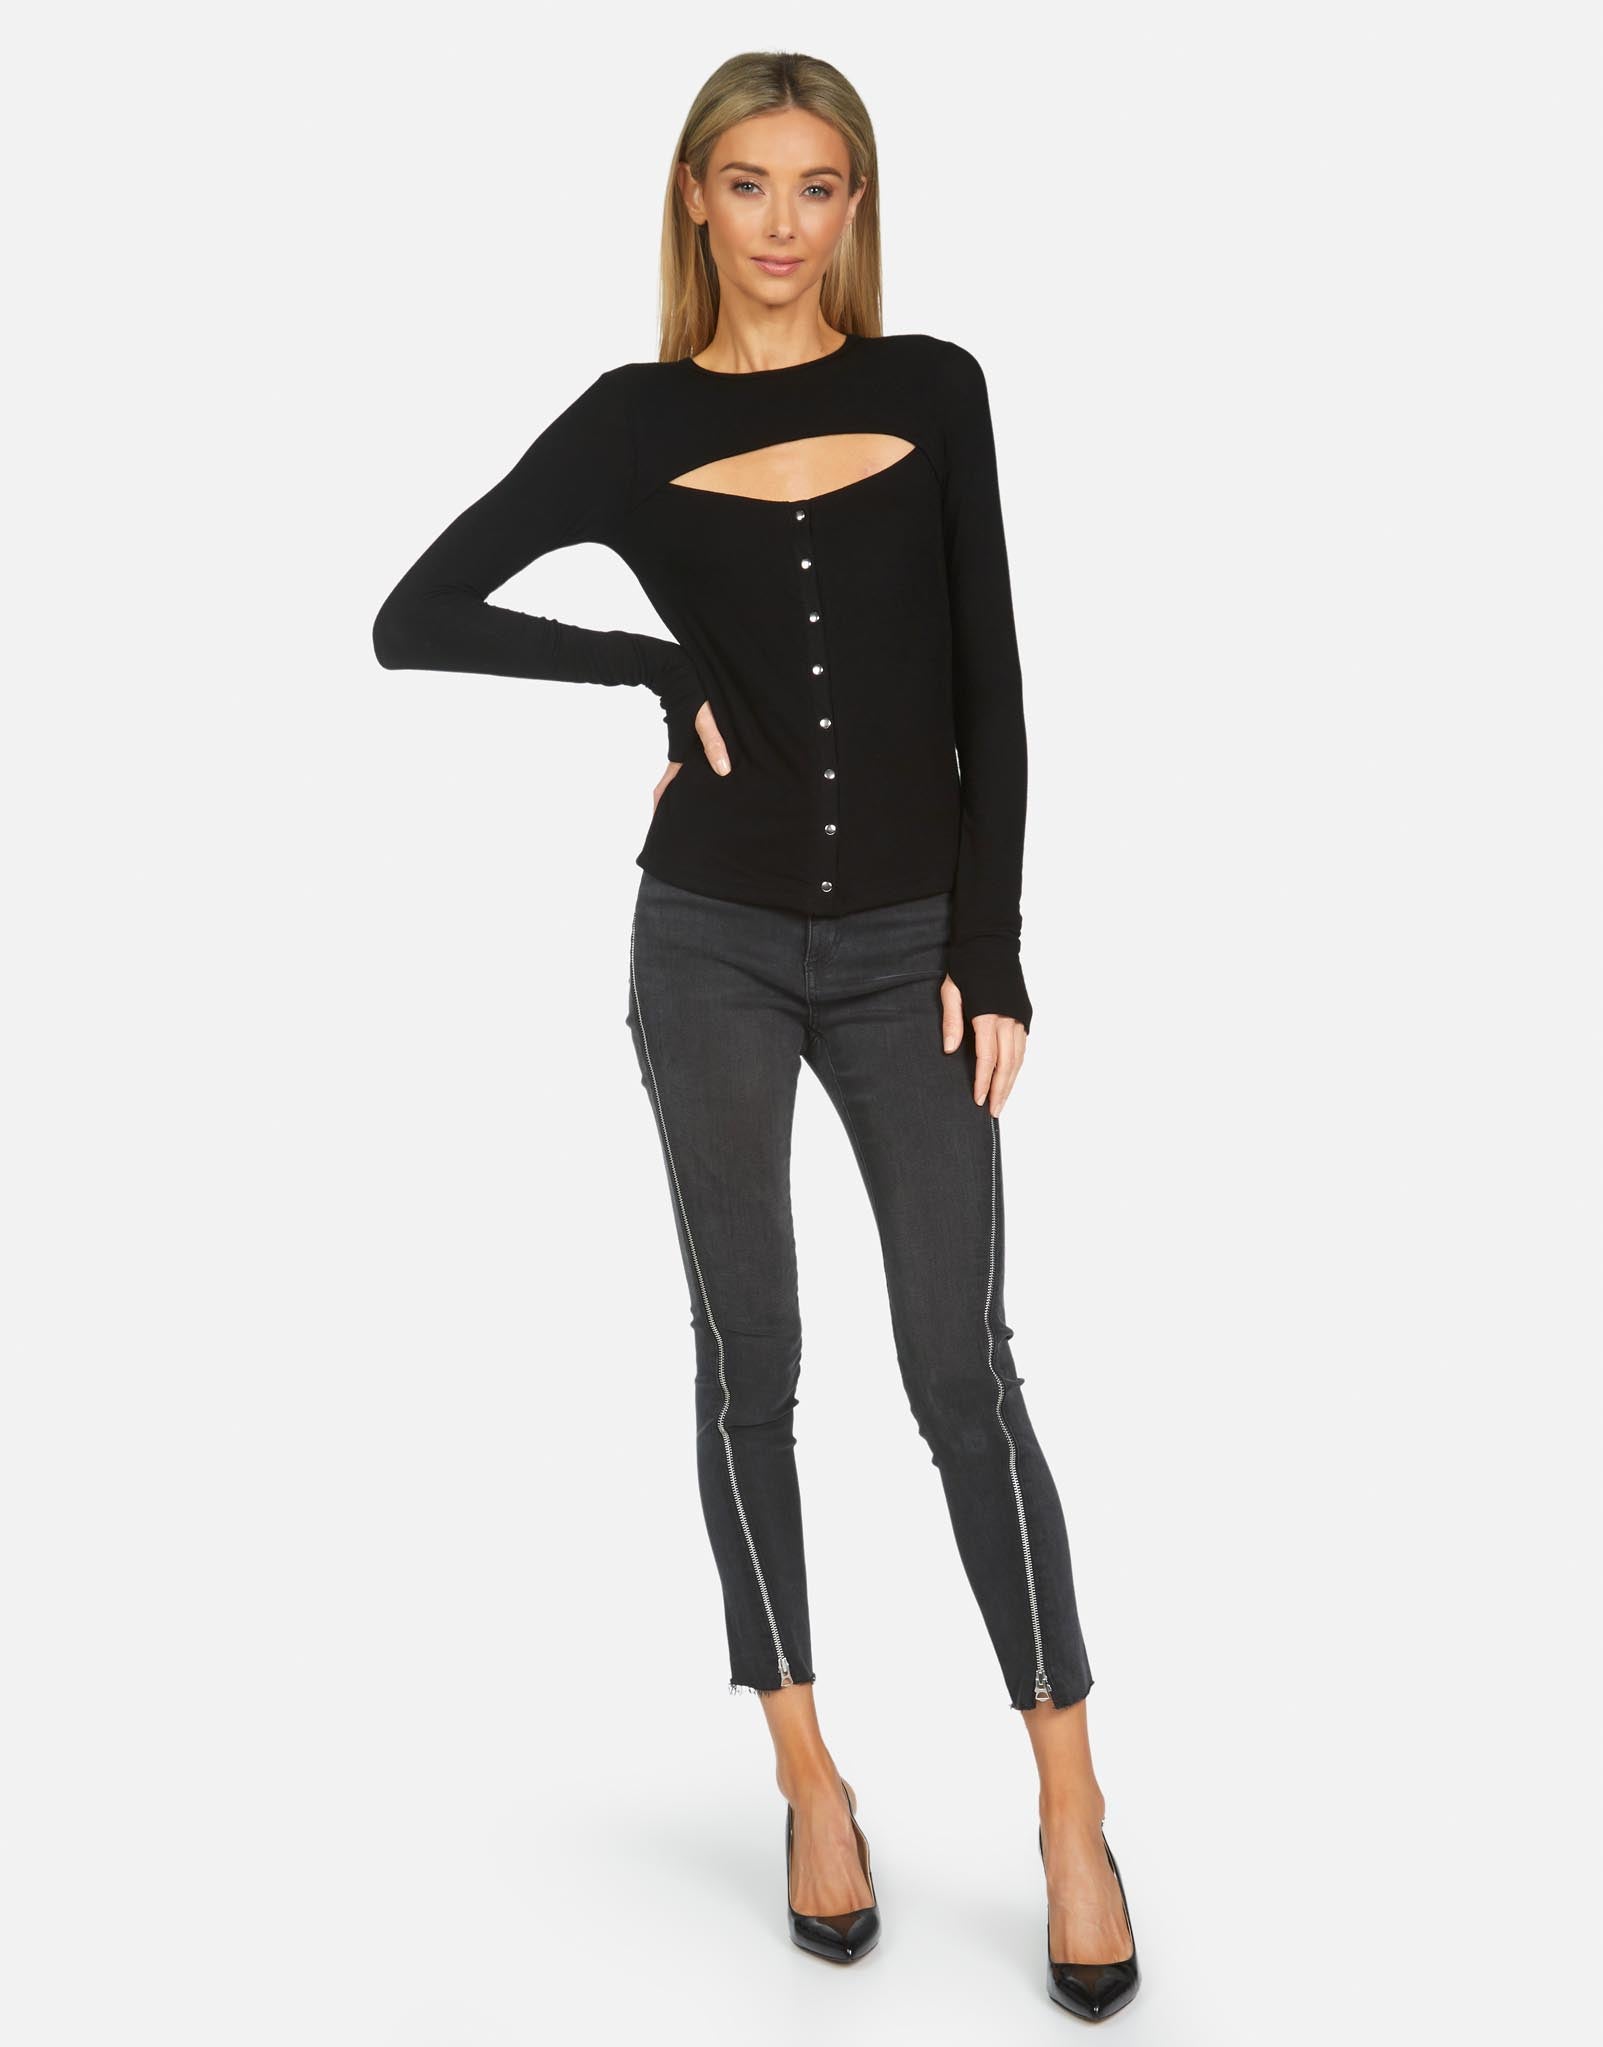 Manolo Snap Top - Black XS